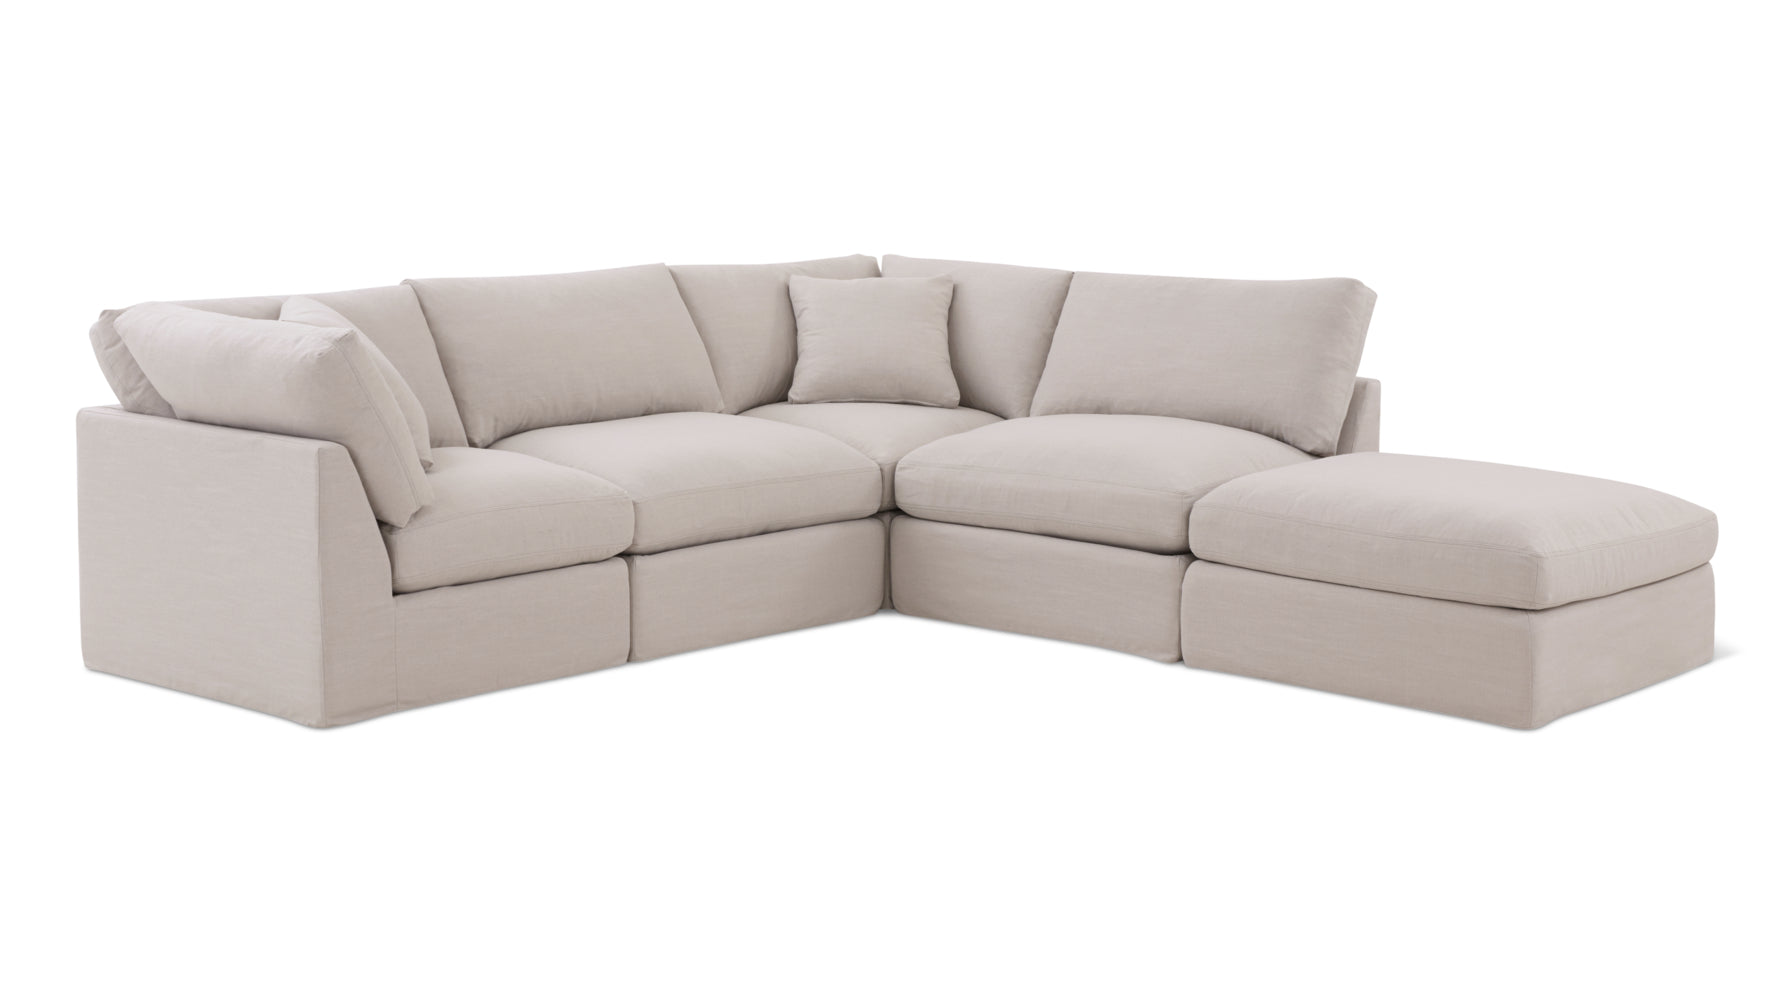 Get Together™ 5-Piece Modular Sectional, Standard, Clay - Image 5